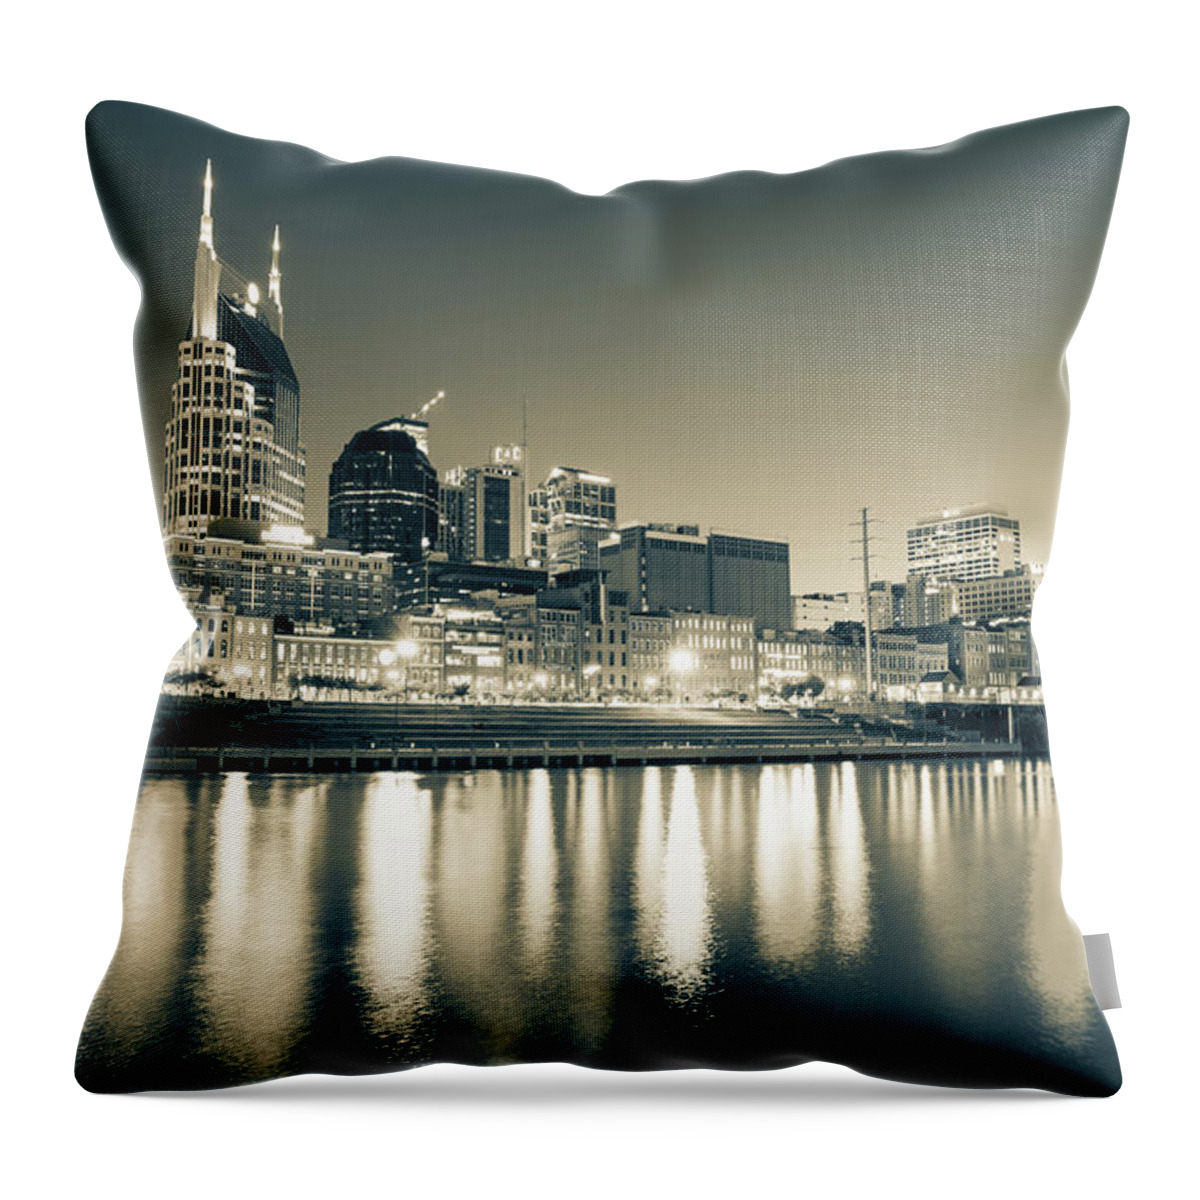 Nashville Skyline Throw Pillow featuring the photograph Nashville Tennessee City Skyline At Dusk - Sepia Monochrome by Gregory Ballos